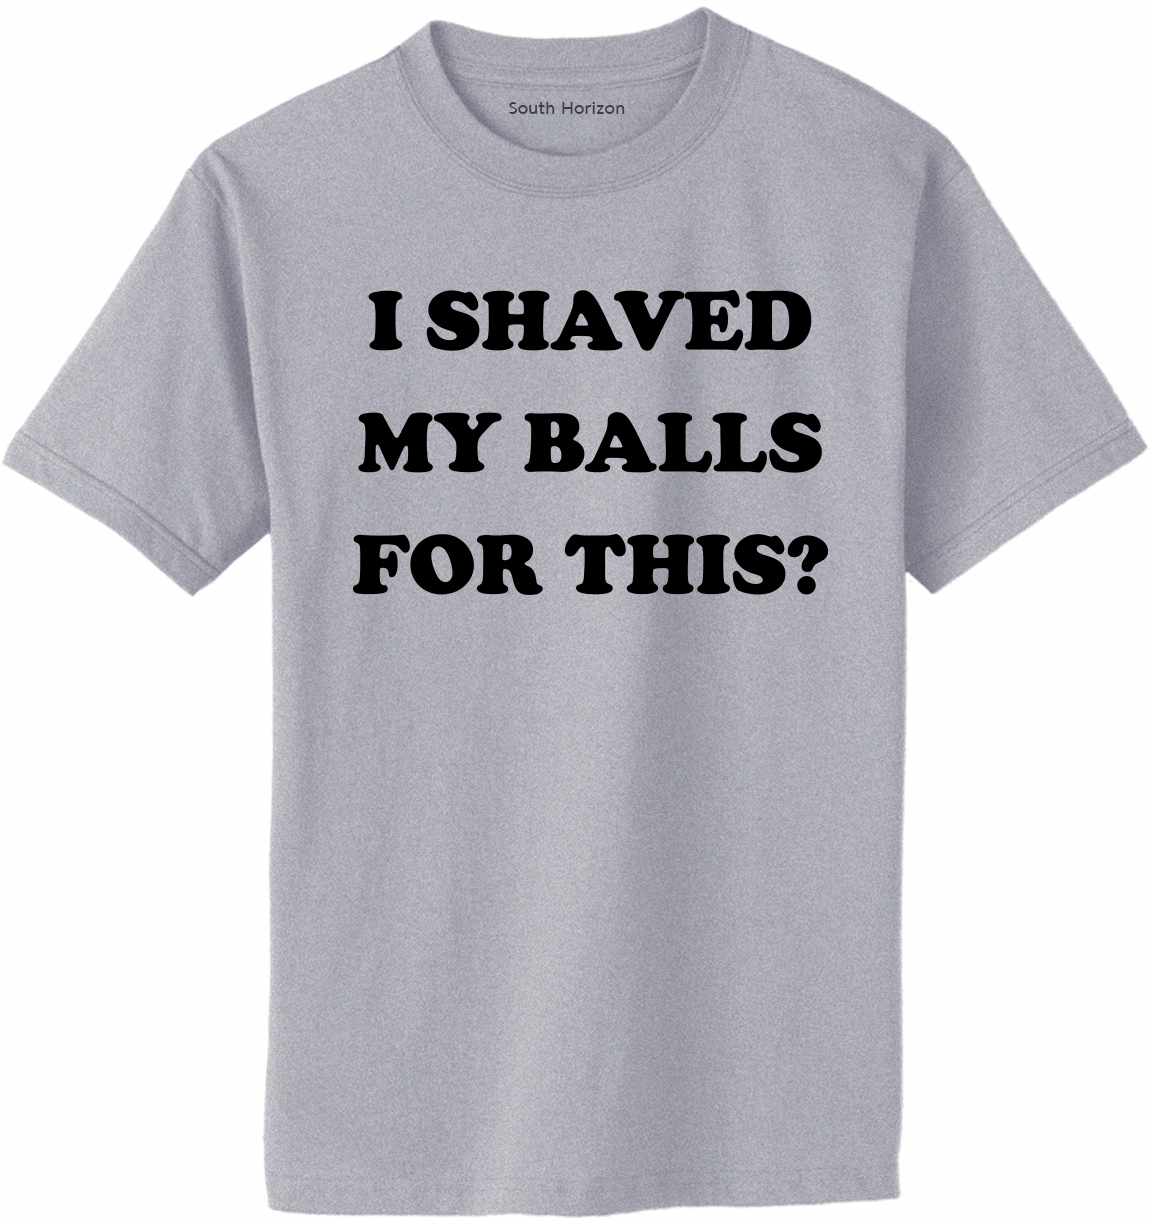 I SHAVED MY BALLS FOR THIS Adult T-Shirt